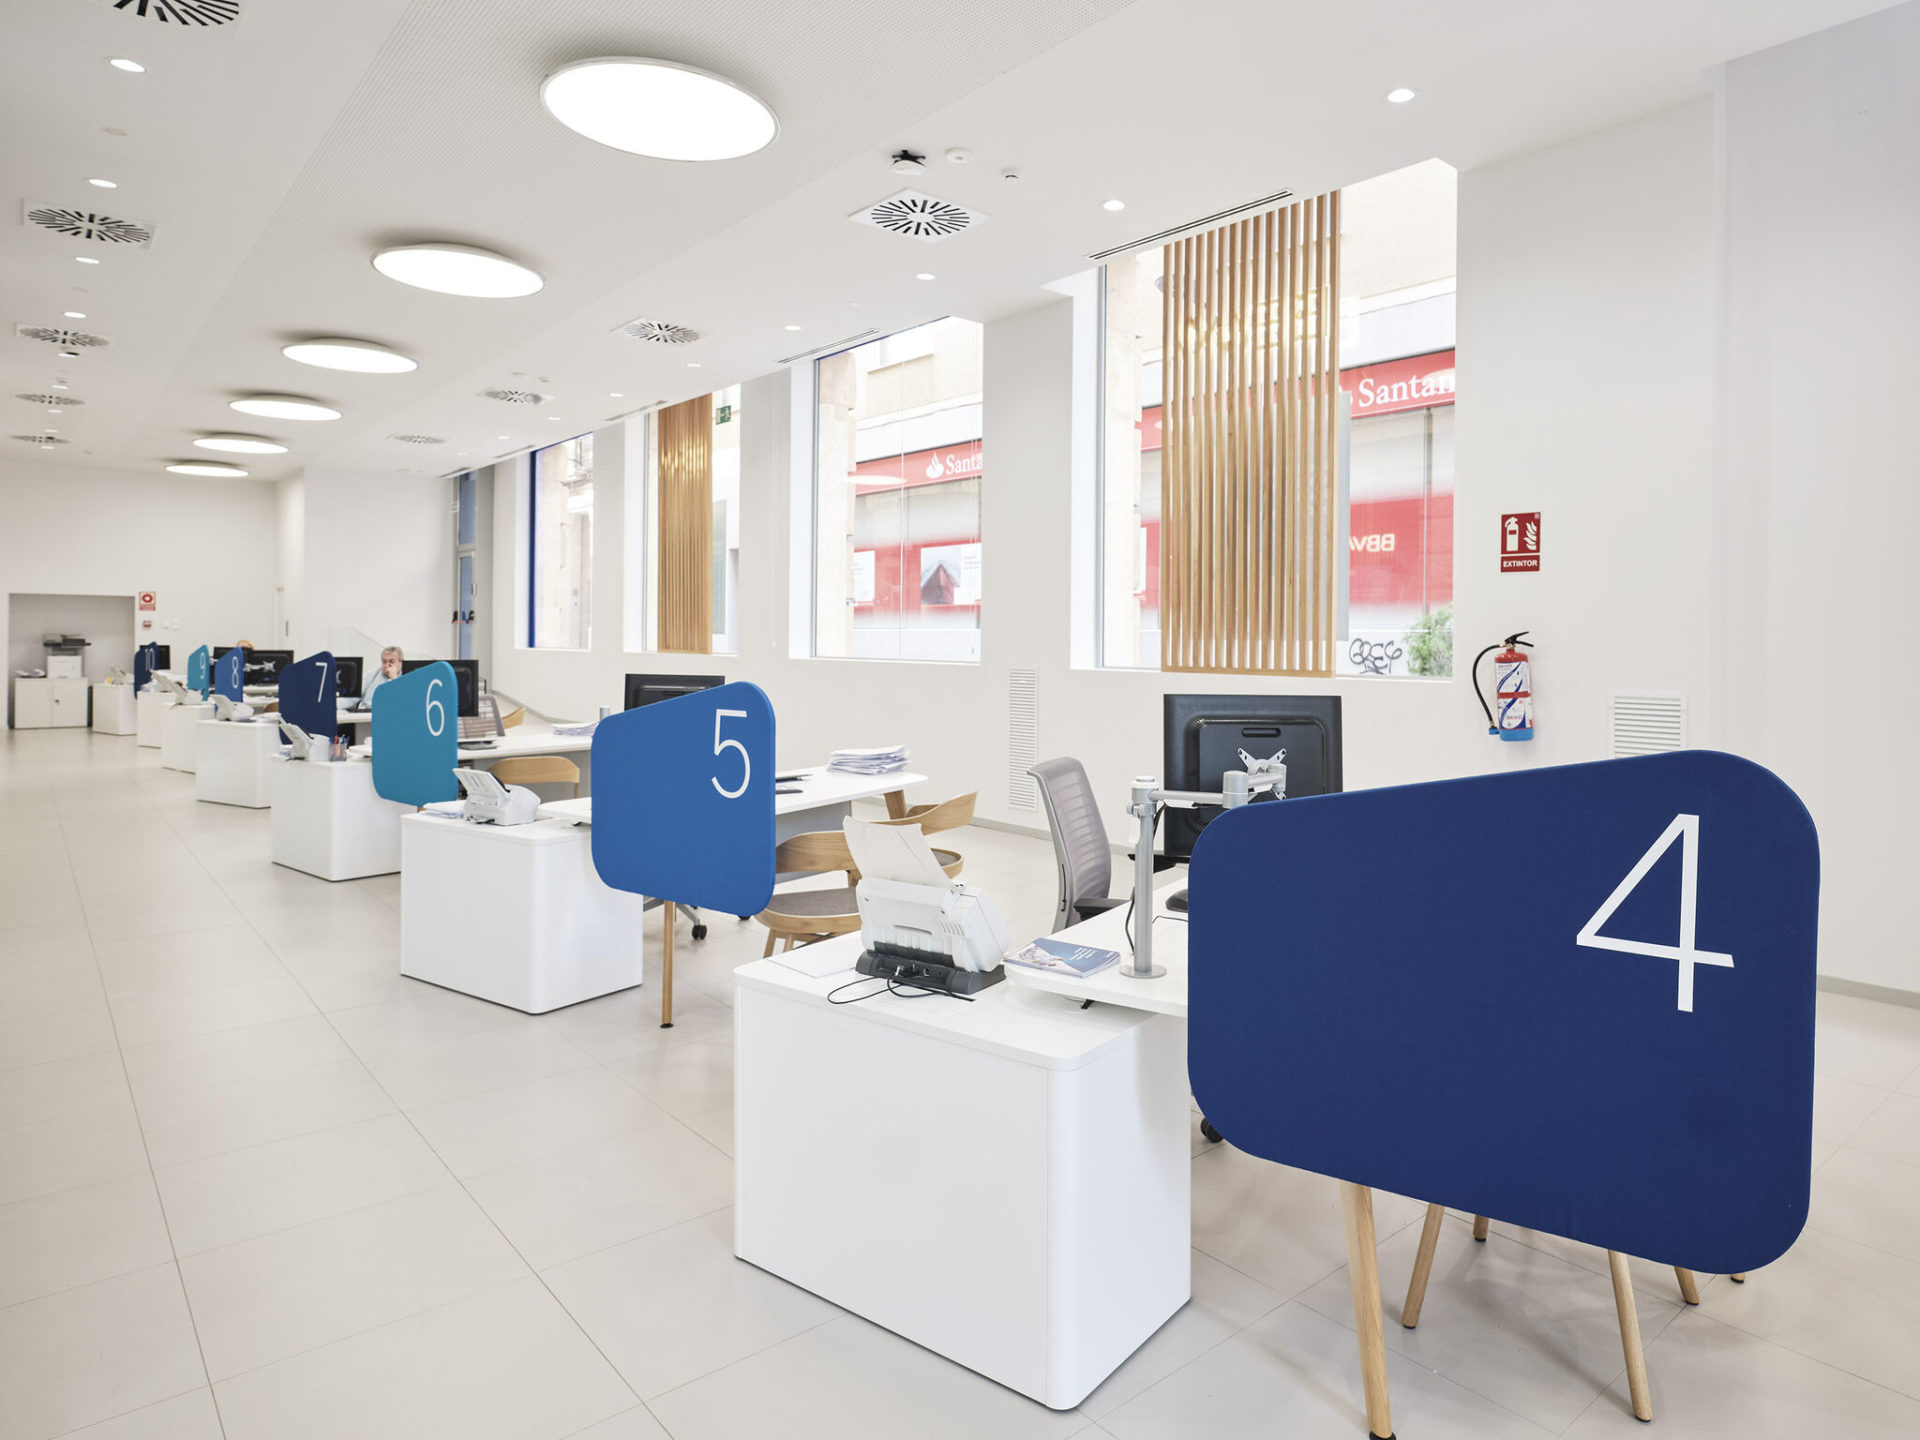 Banks redesign the user experience in their branch offices through design.